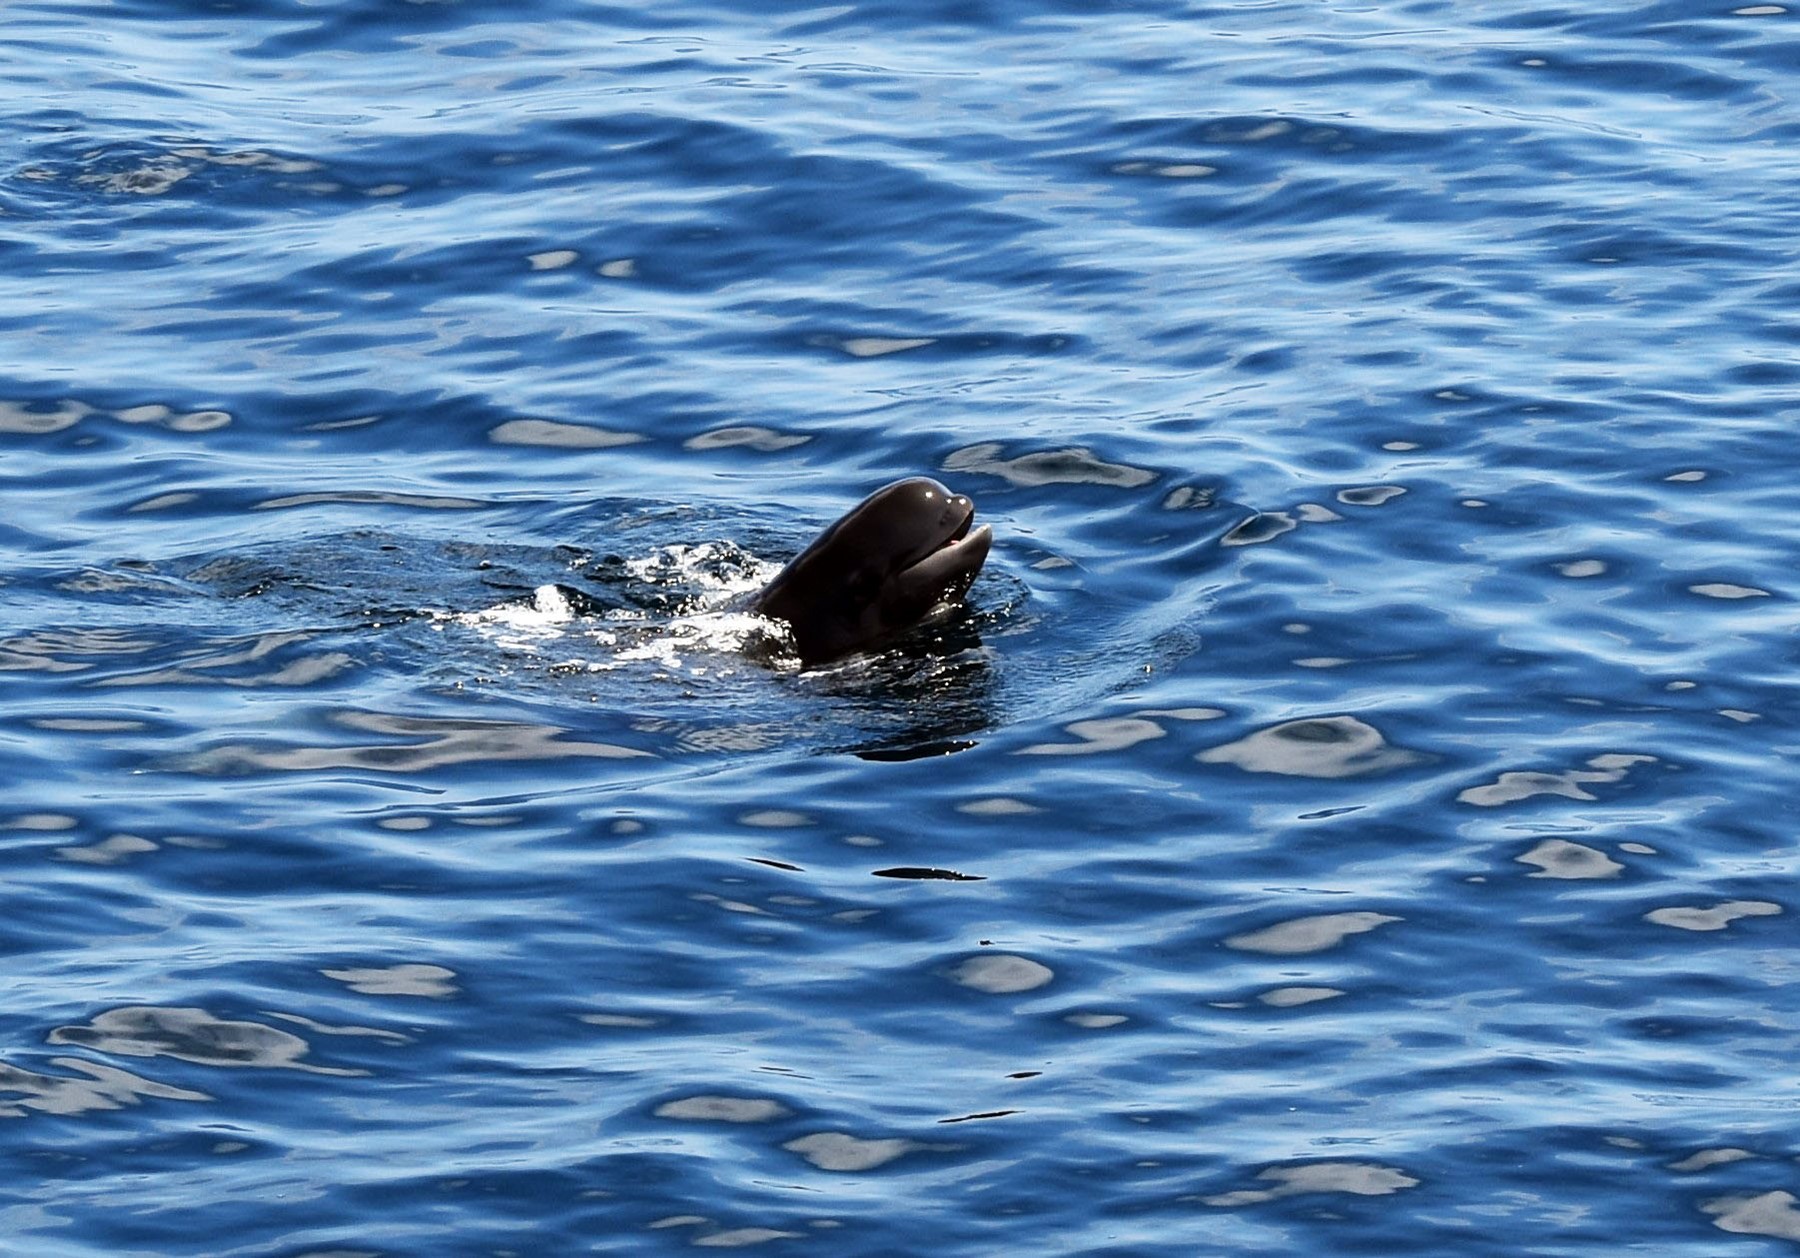 The OOI Pioneer Team often encounters local inhabitants of the area. One recent visitor was a pilot whale. Photo: Rebecca Travis©WHOI.